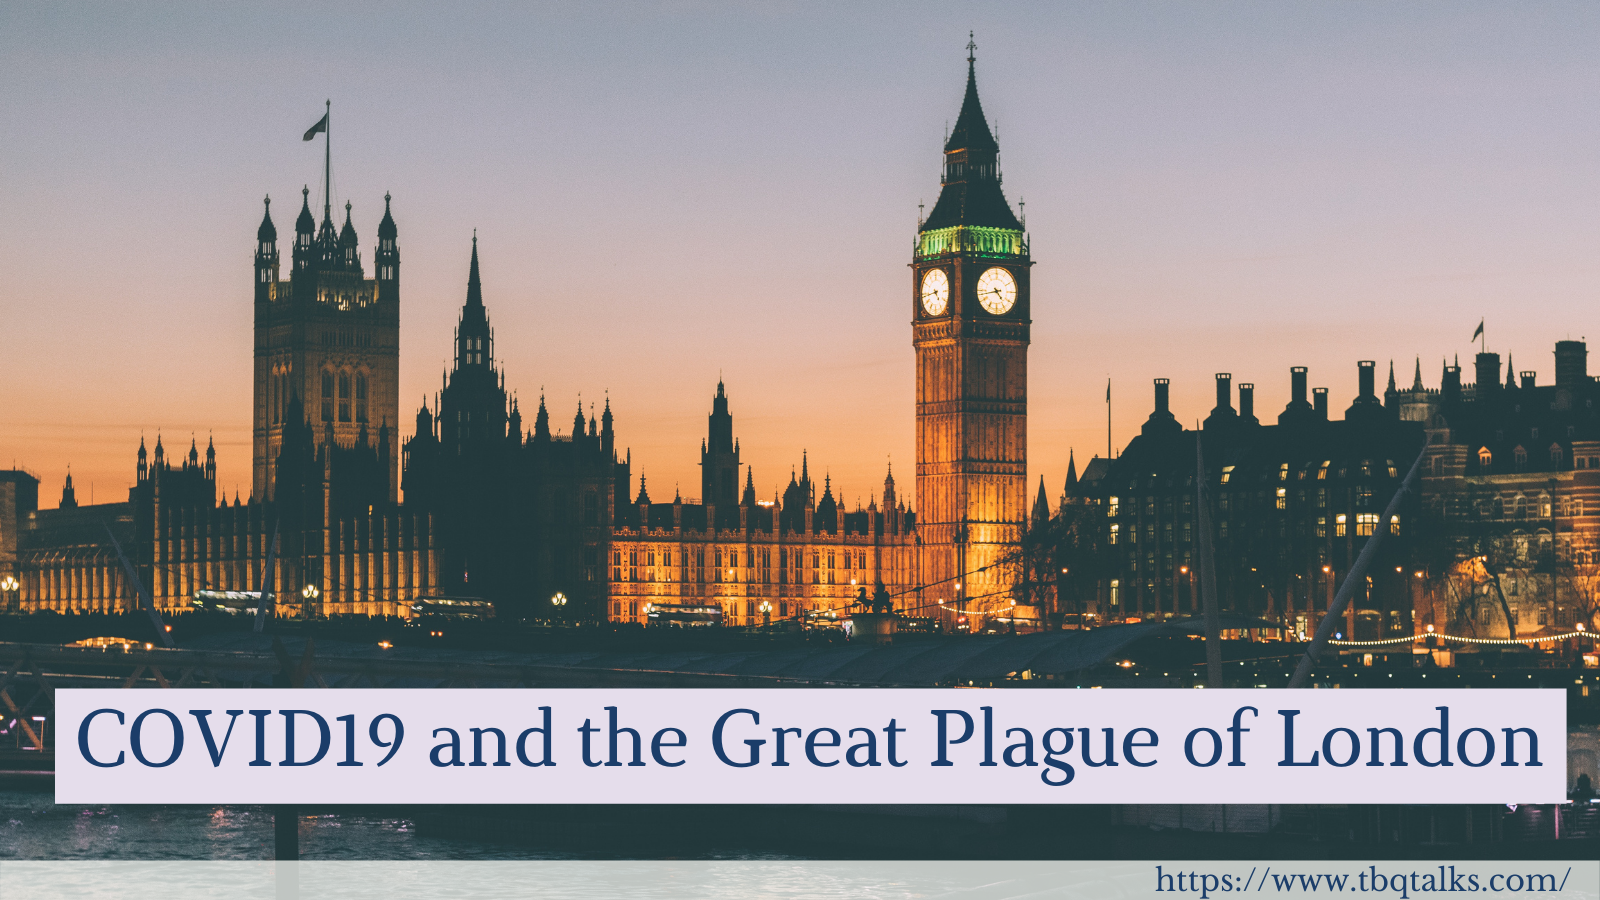 COVID19 and the Great Plague of London